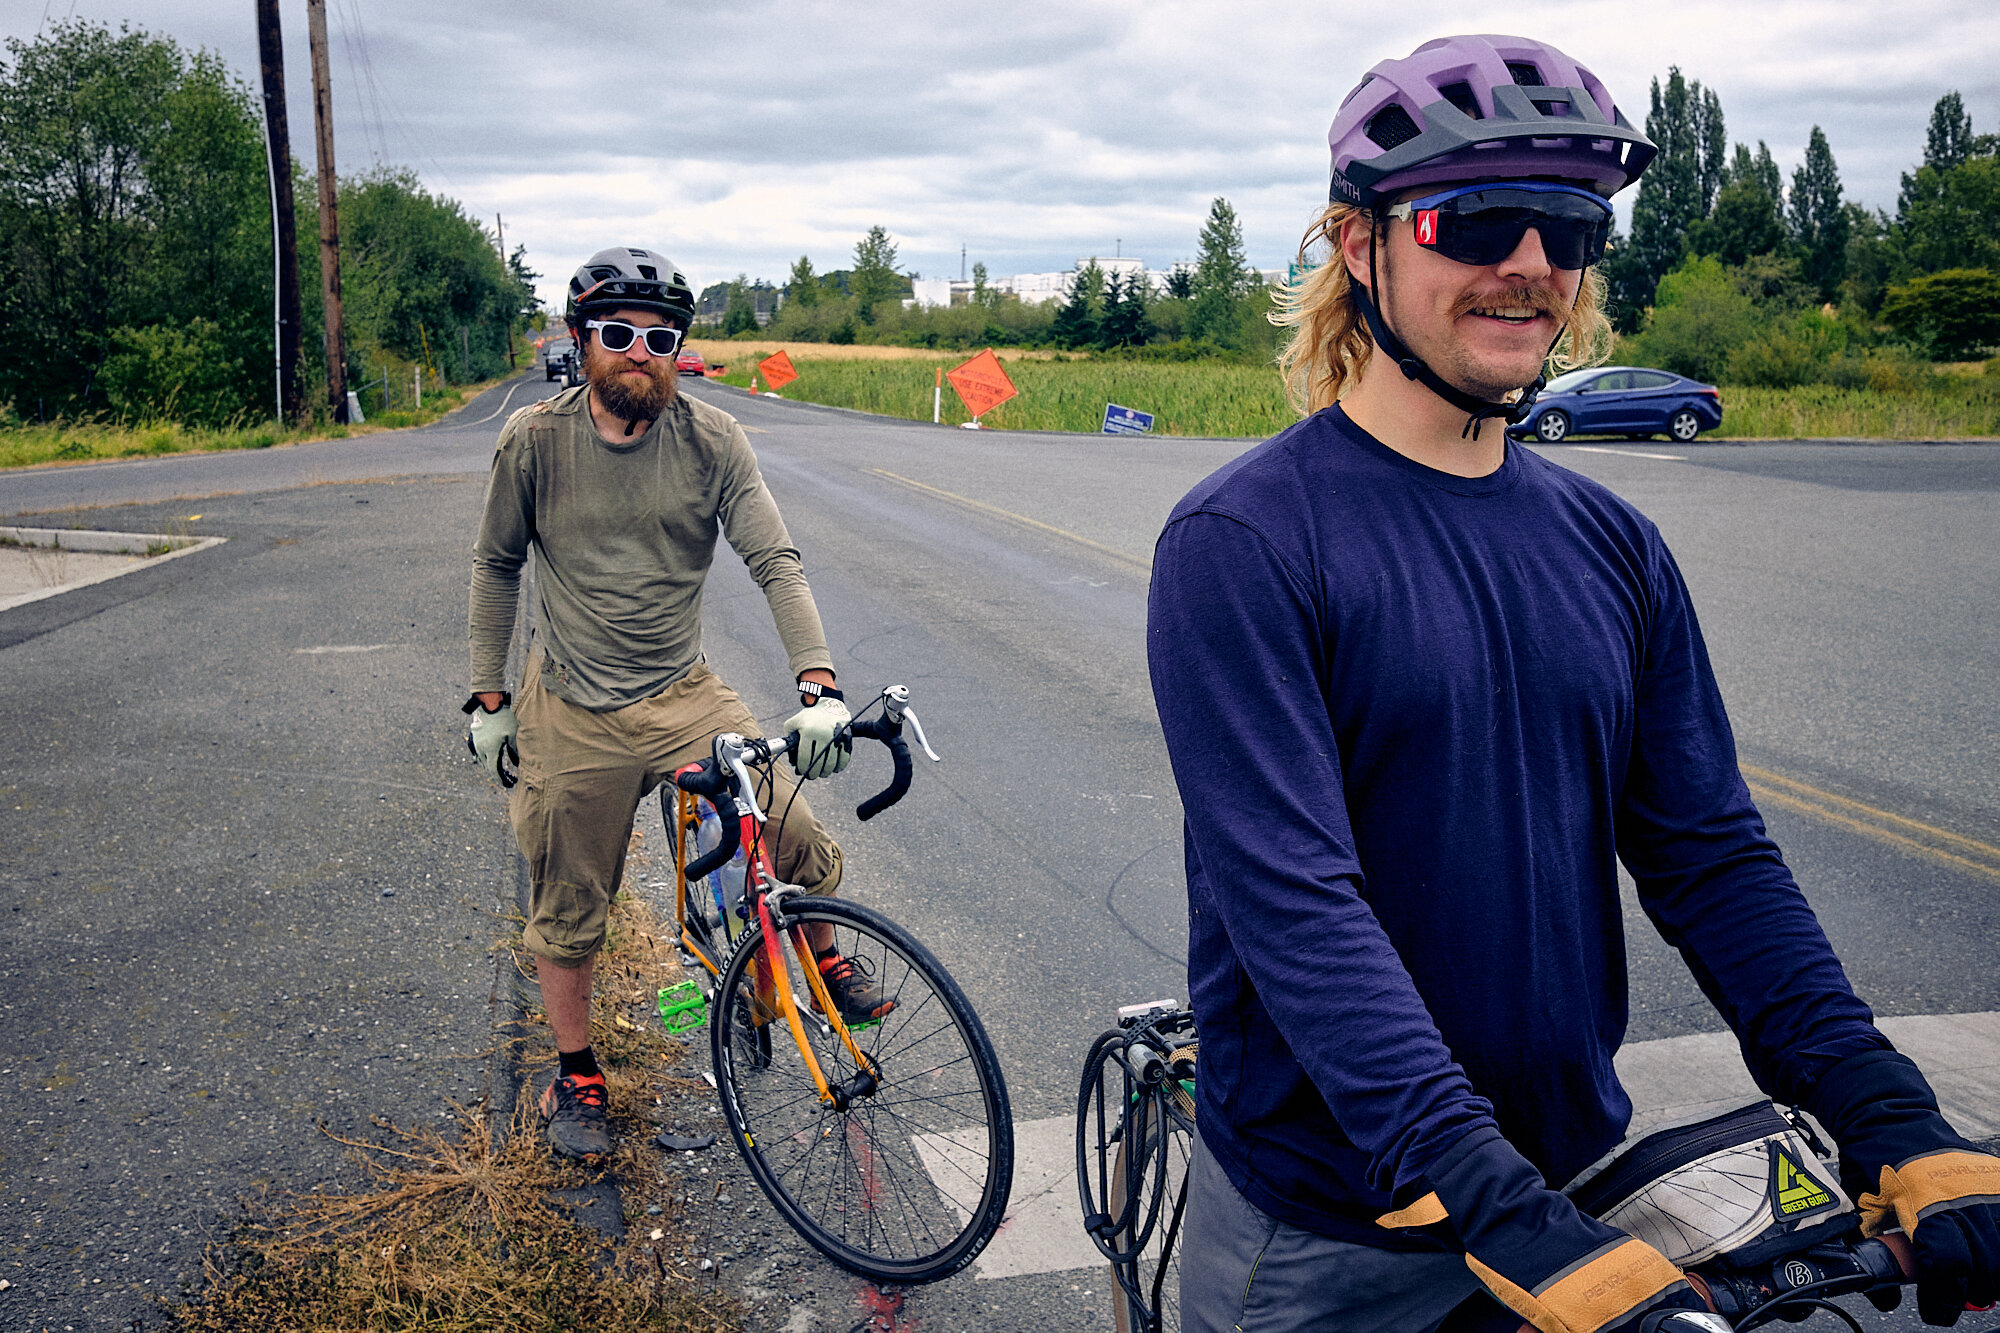  Skeeter and Lucas apprehensively  wait to turn on to Highway 20, the most highly trafficked portion of our bike route alternate. The PNT primary walks mostly roads for 80 miles from Bellingham to the Coupeville ferry, which sounded awful. So we just